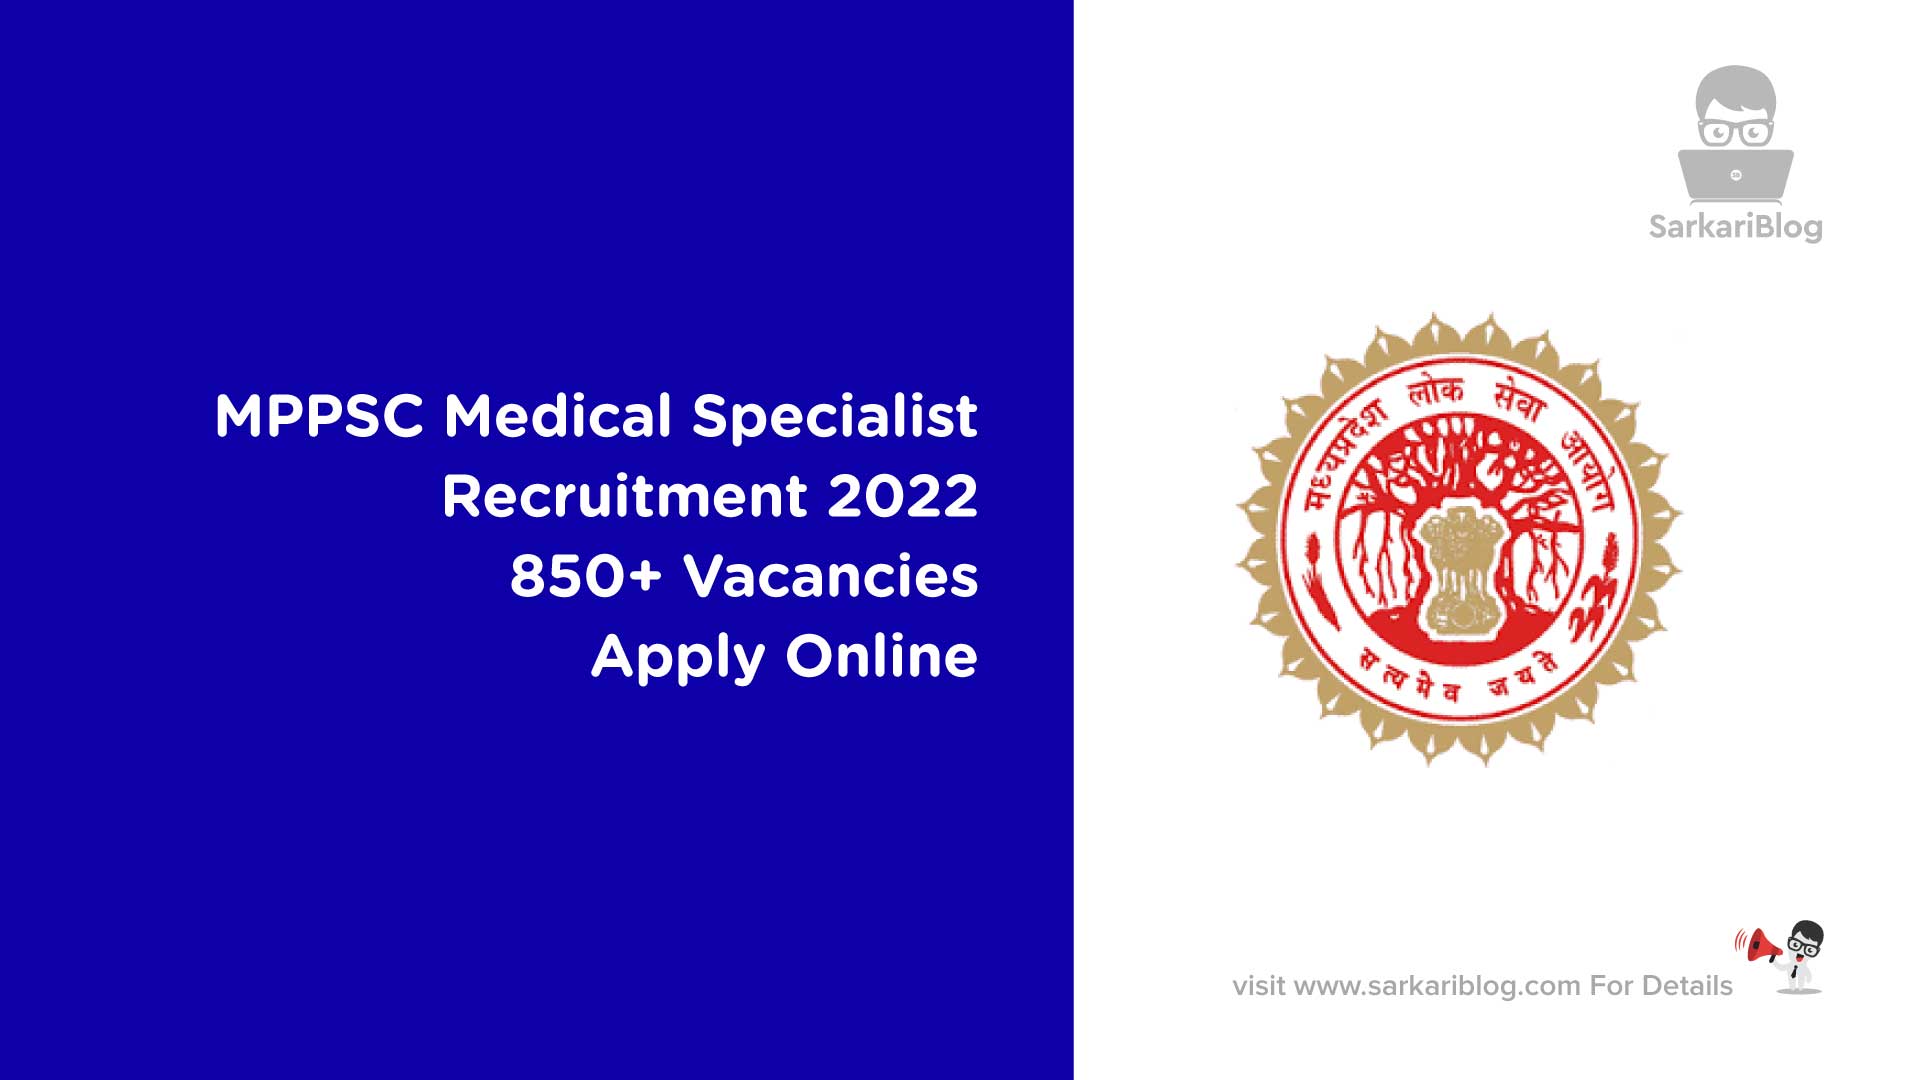 MPPSC Medical Specialist